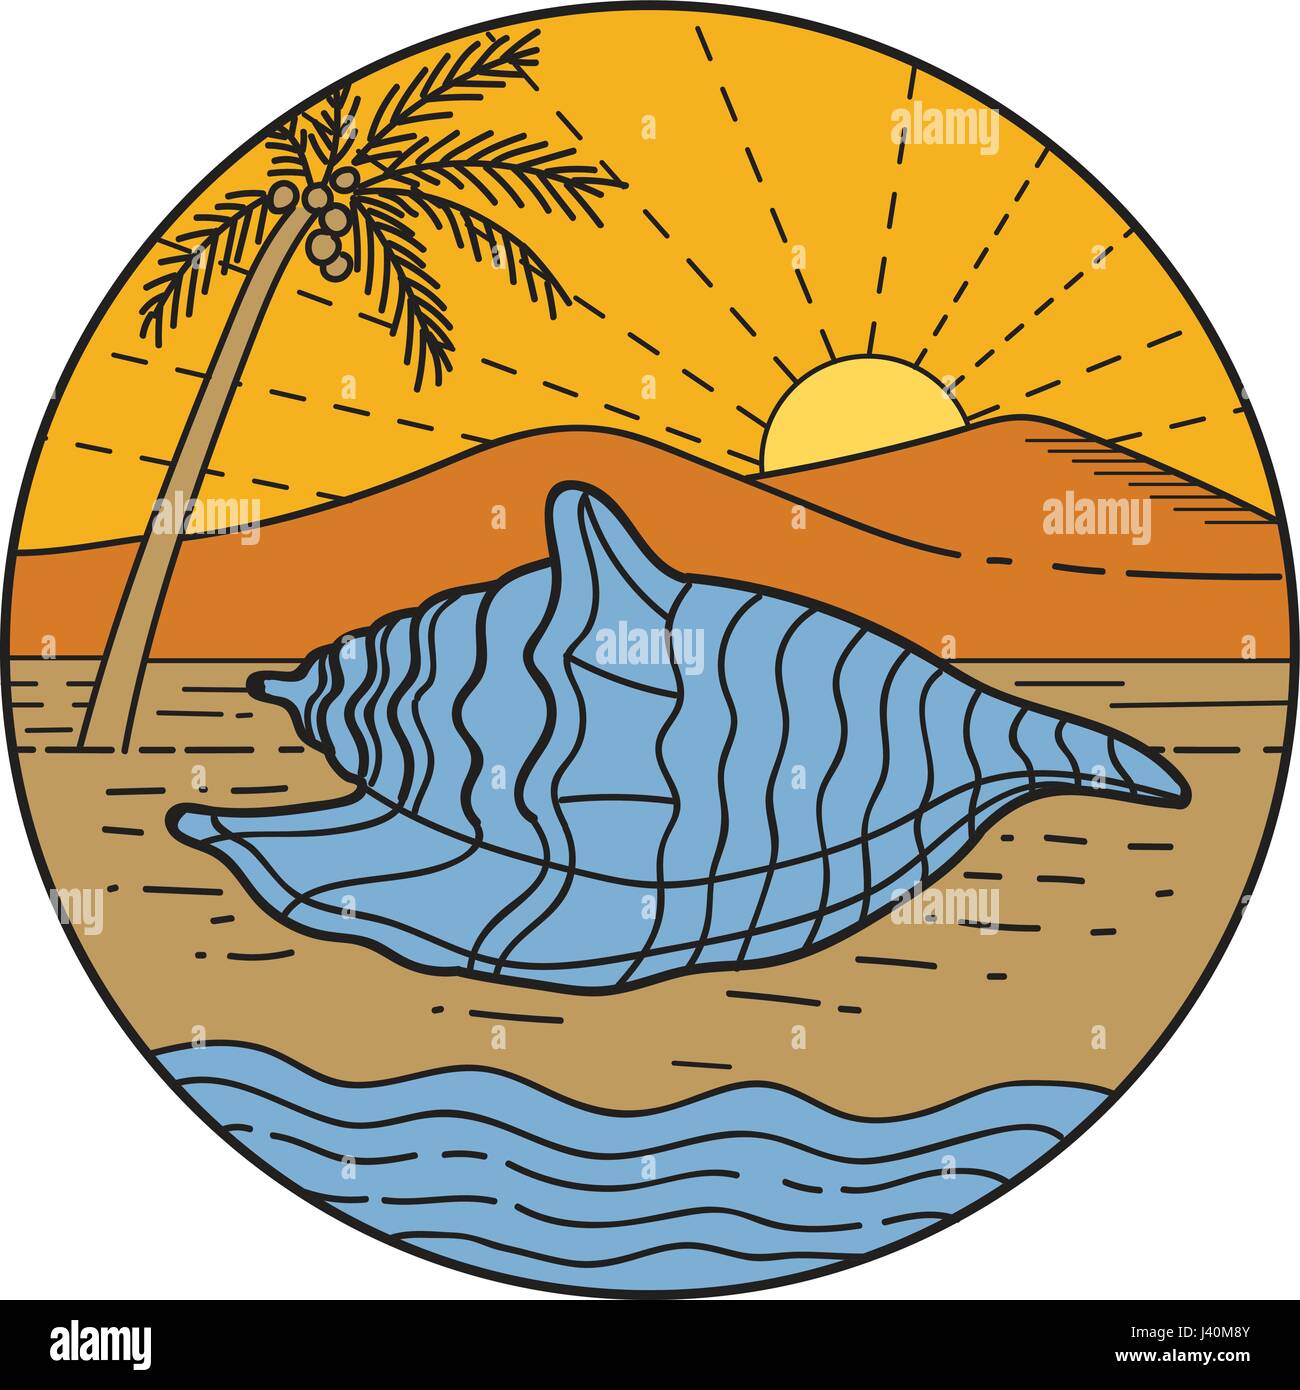 Mono line style illustration foa conch shell laying on beach with mountain, sun and coconut tree in the background set inside circle. Stock Vector